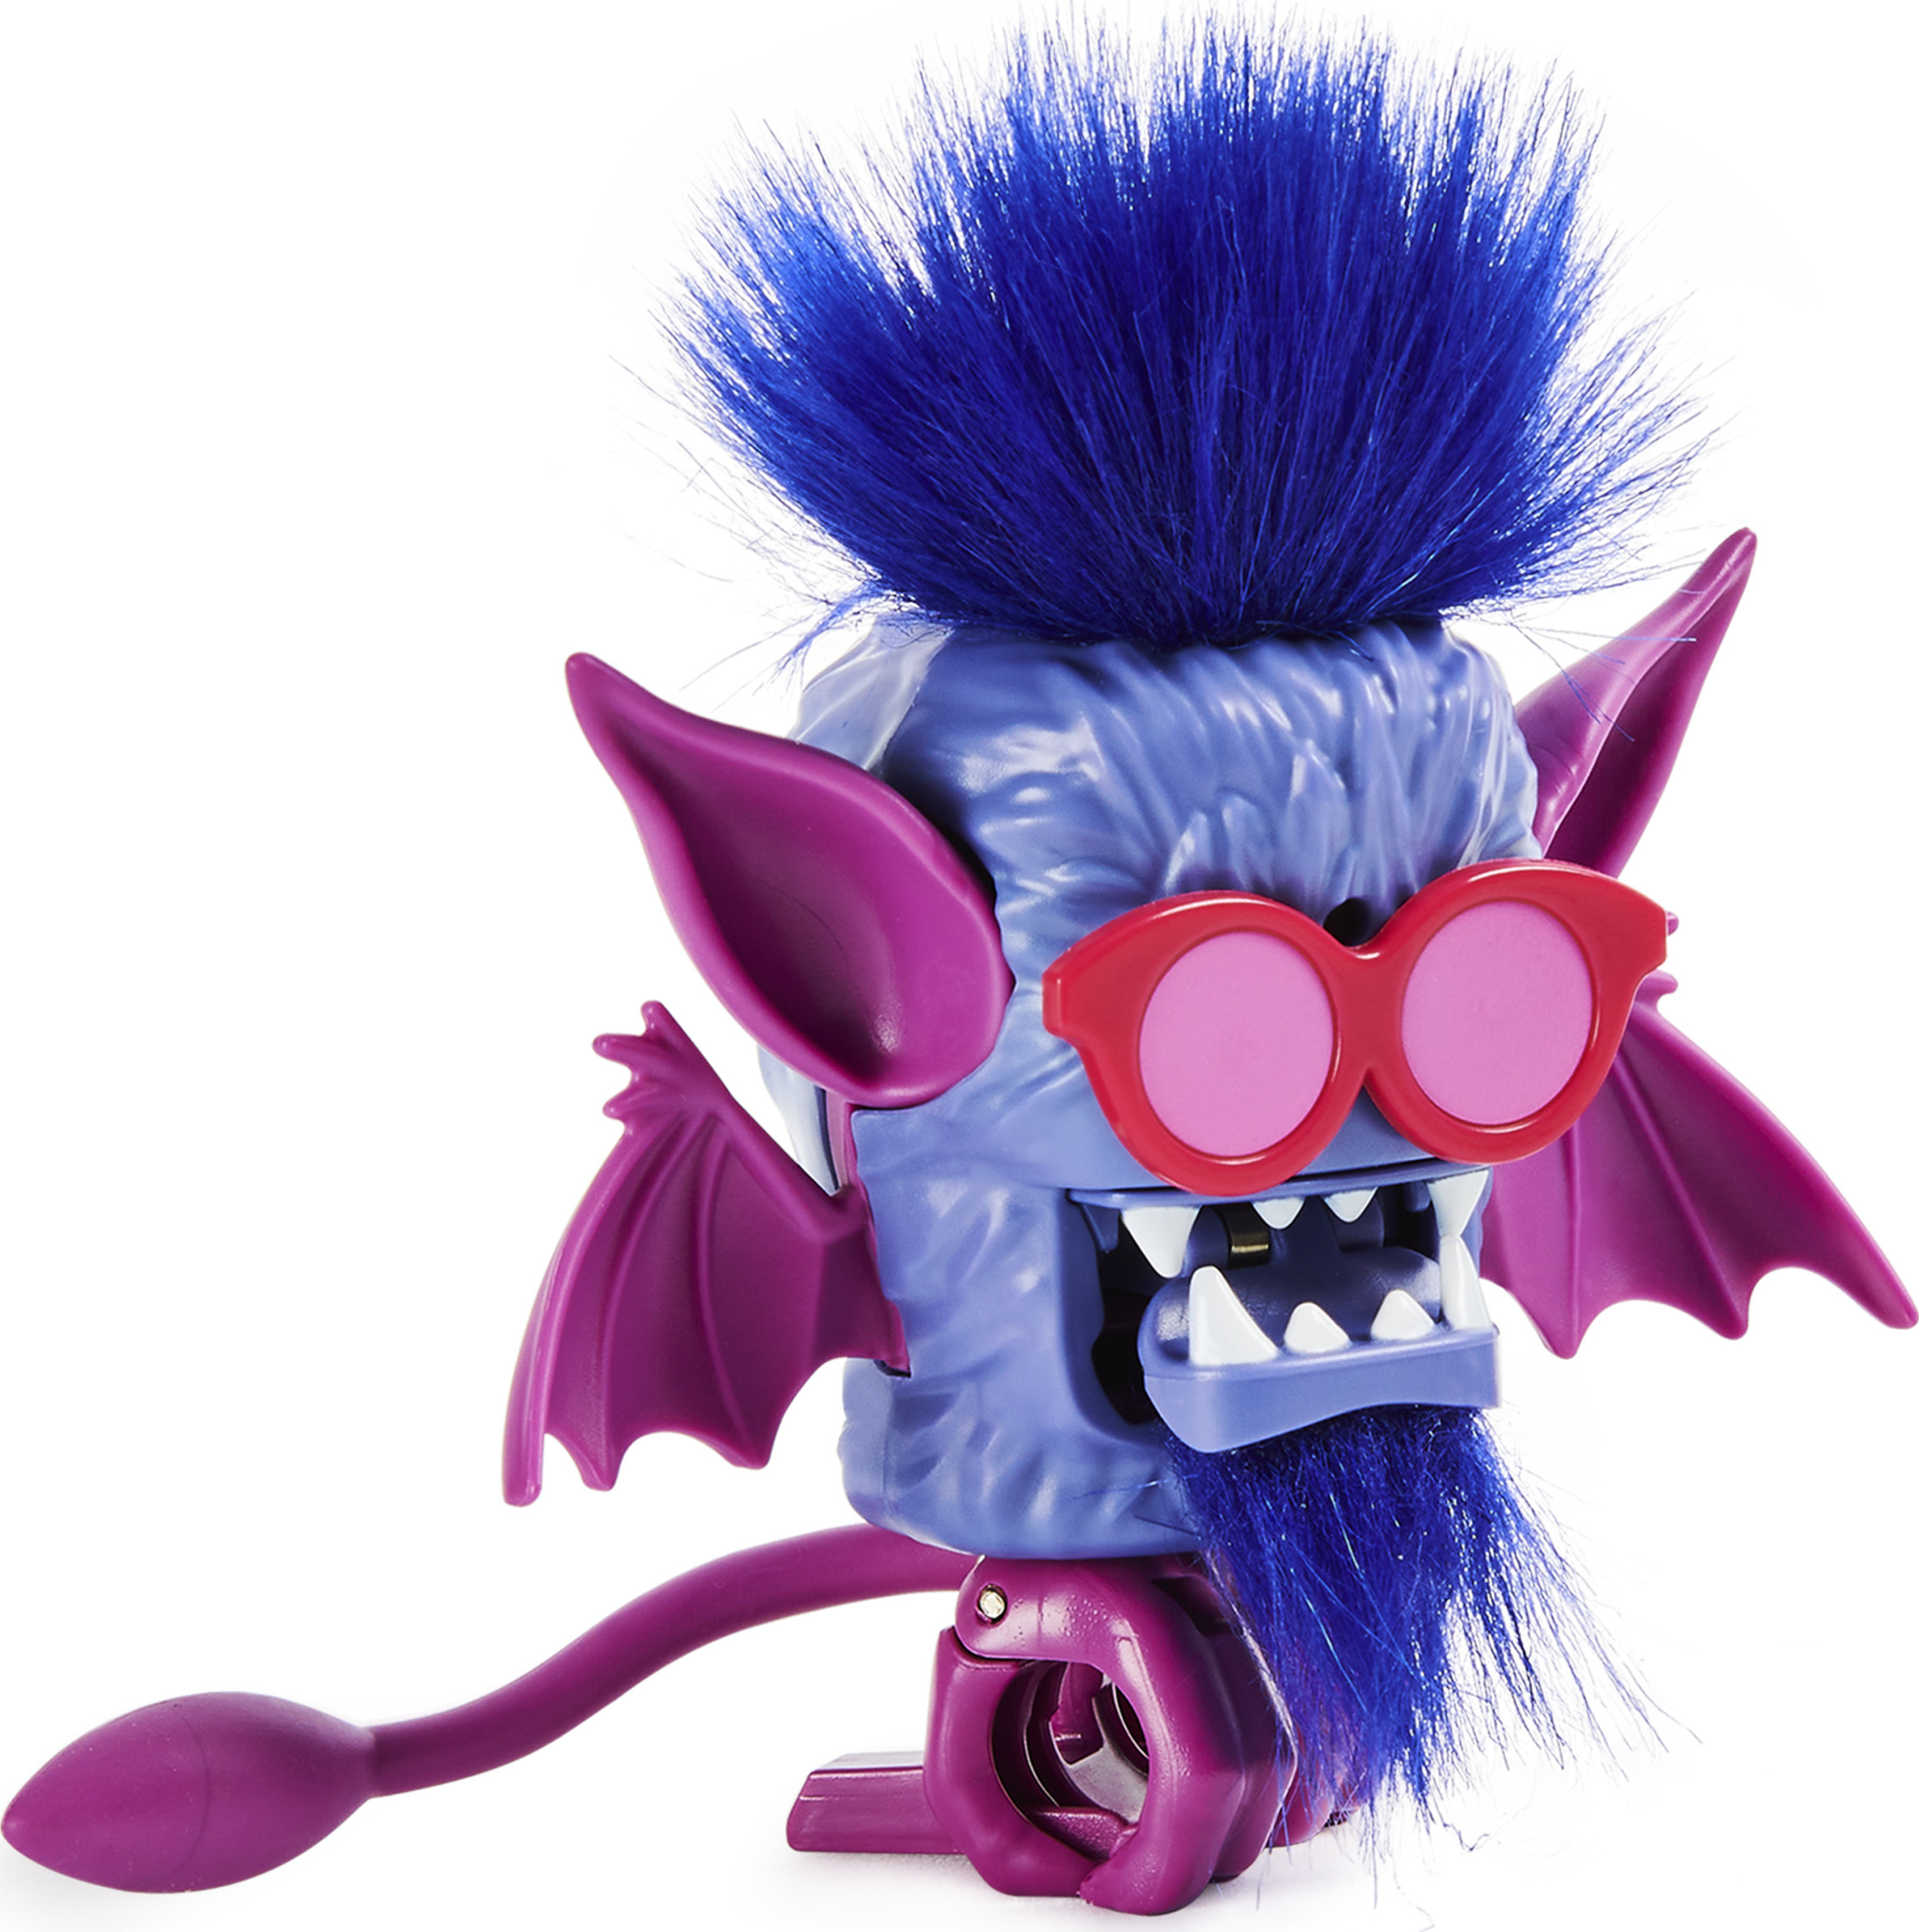 Scritterz, Battyz Interactive Collectible Jungle Creature Toy with Sounds and Movement, for Kids Aged 5 and up - image 5 of 8